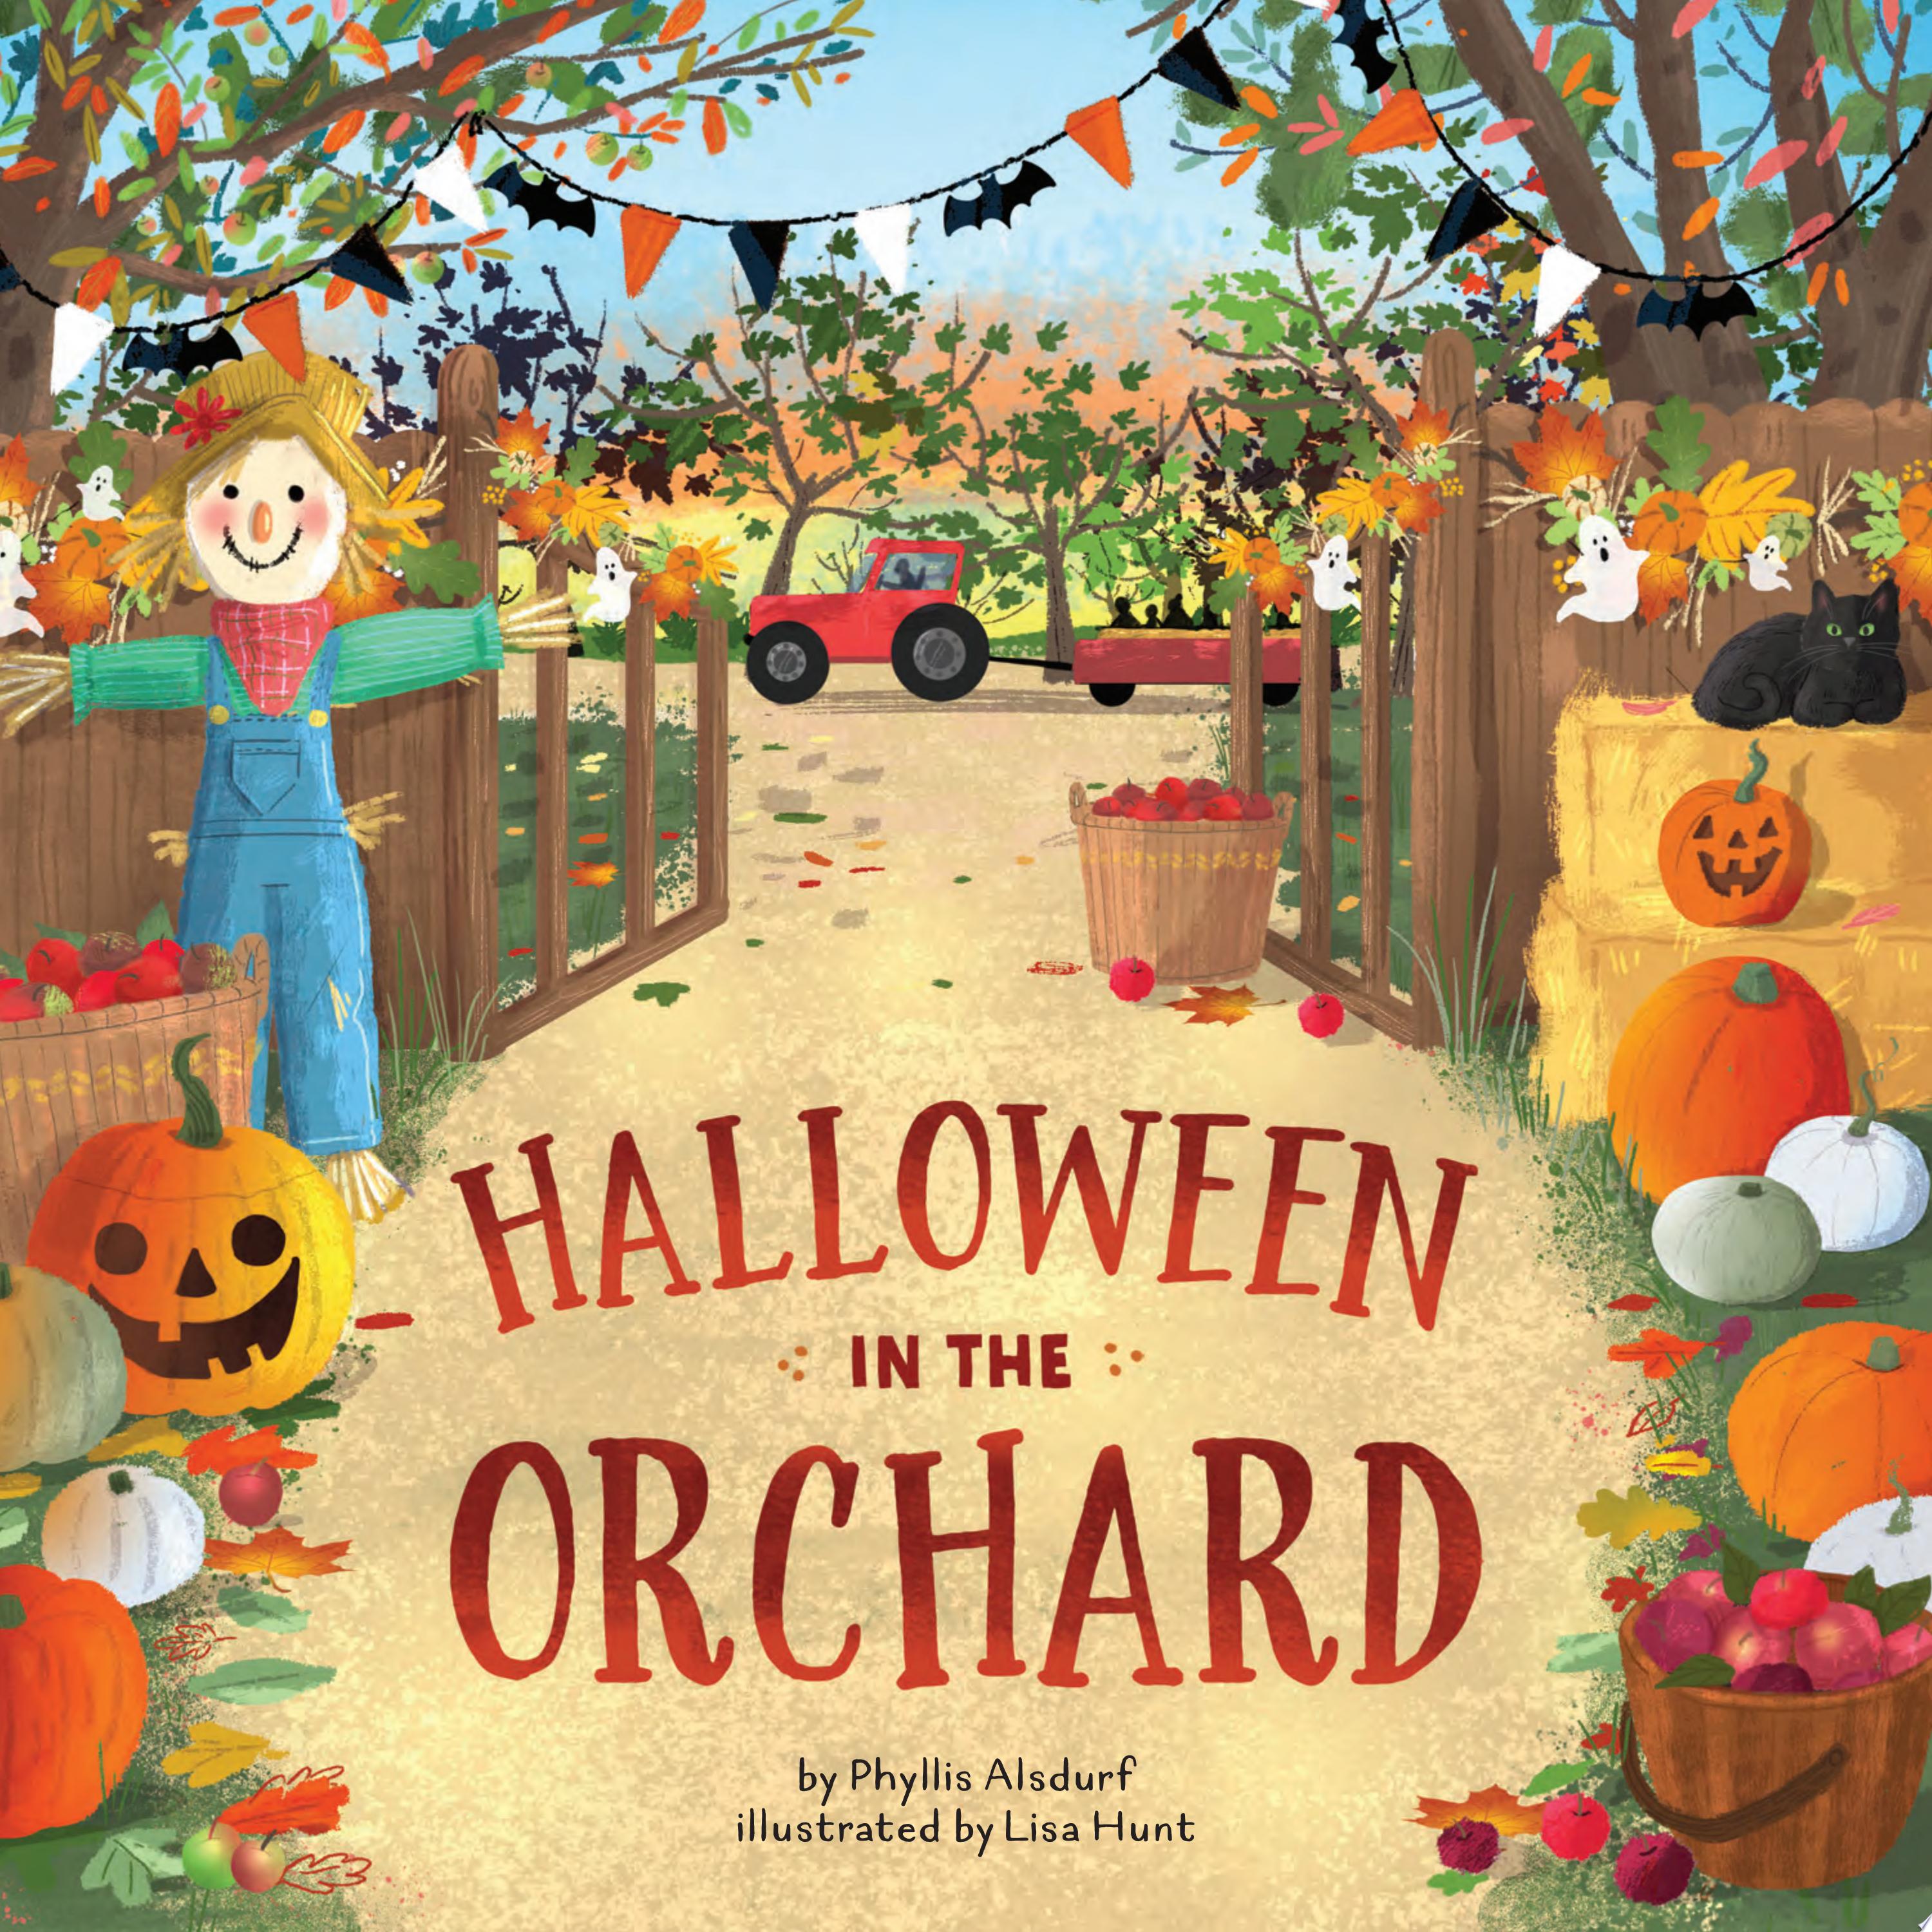 Image for "Halloween in the Orchard"